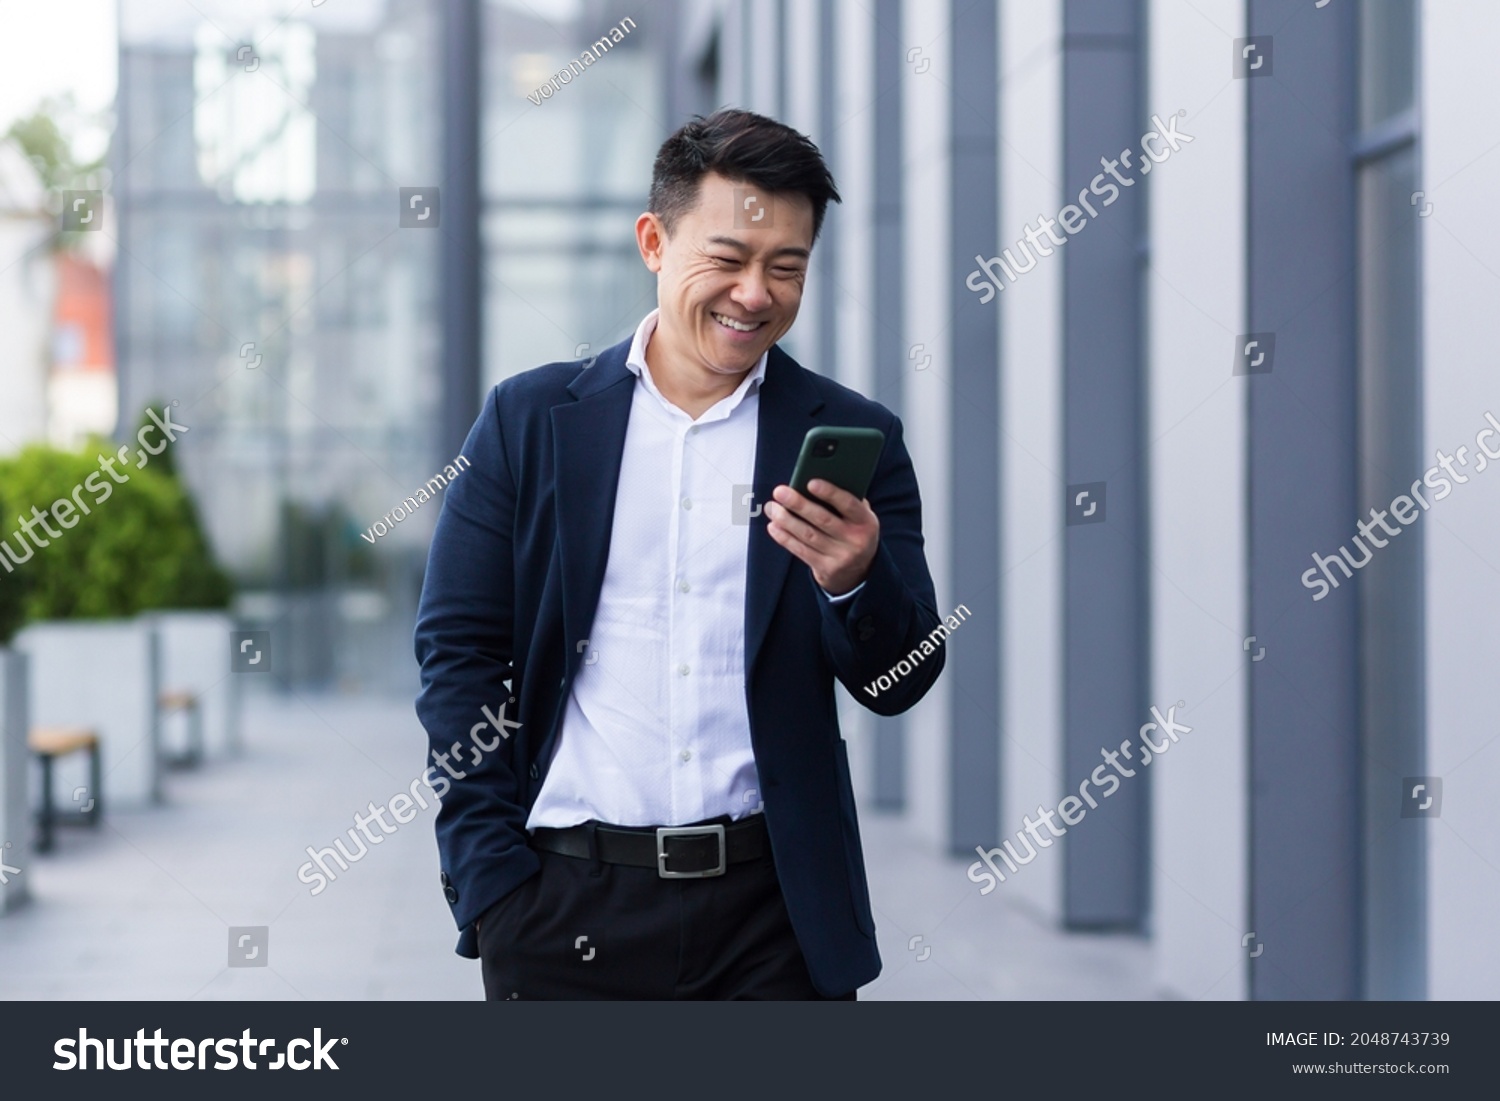 asian male freelancer walking near business center holding phone, smiling reading news, successful businessman #2048743739